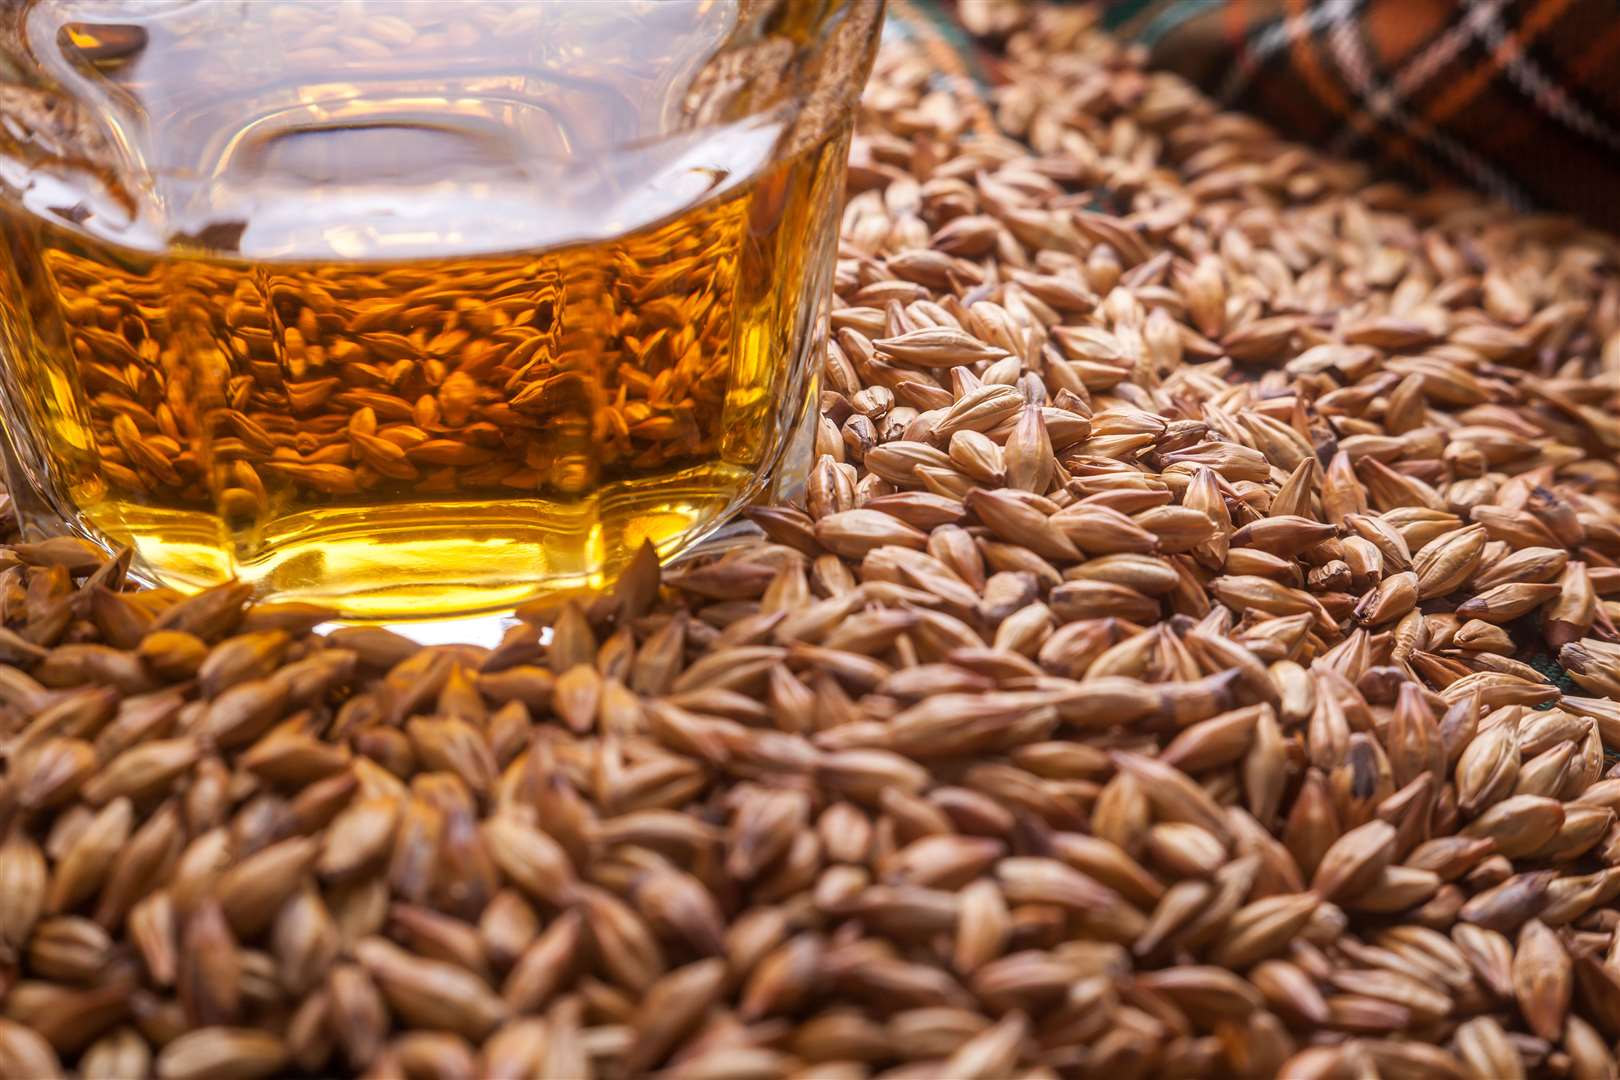 The peaty flavour comes from the malted grain- dried by a peat-fired kiln.